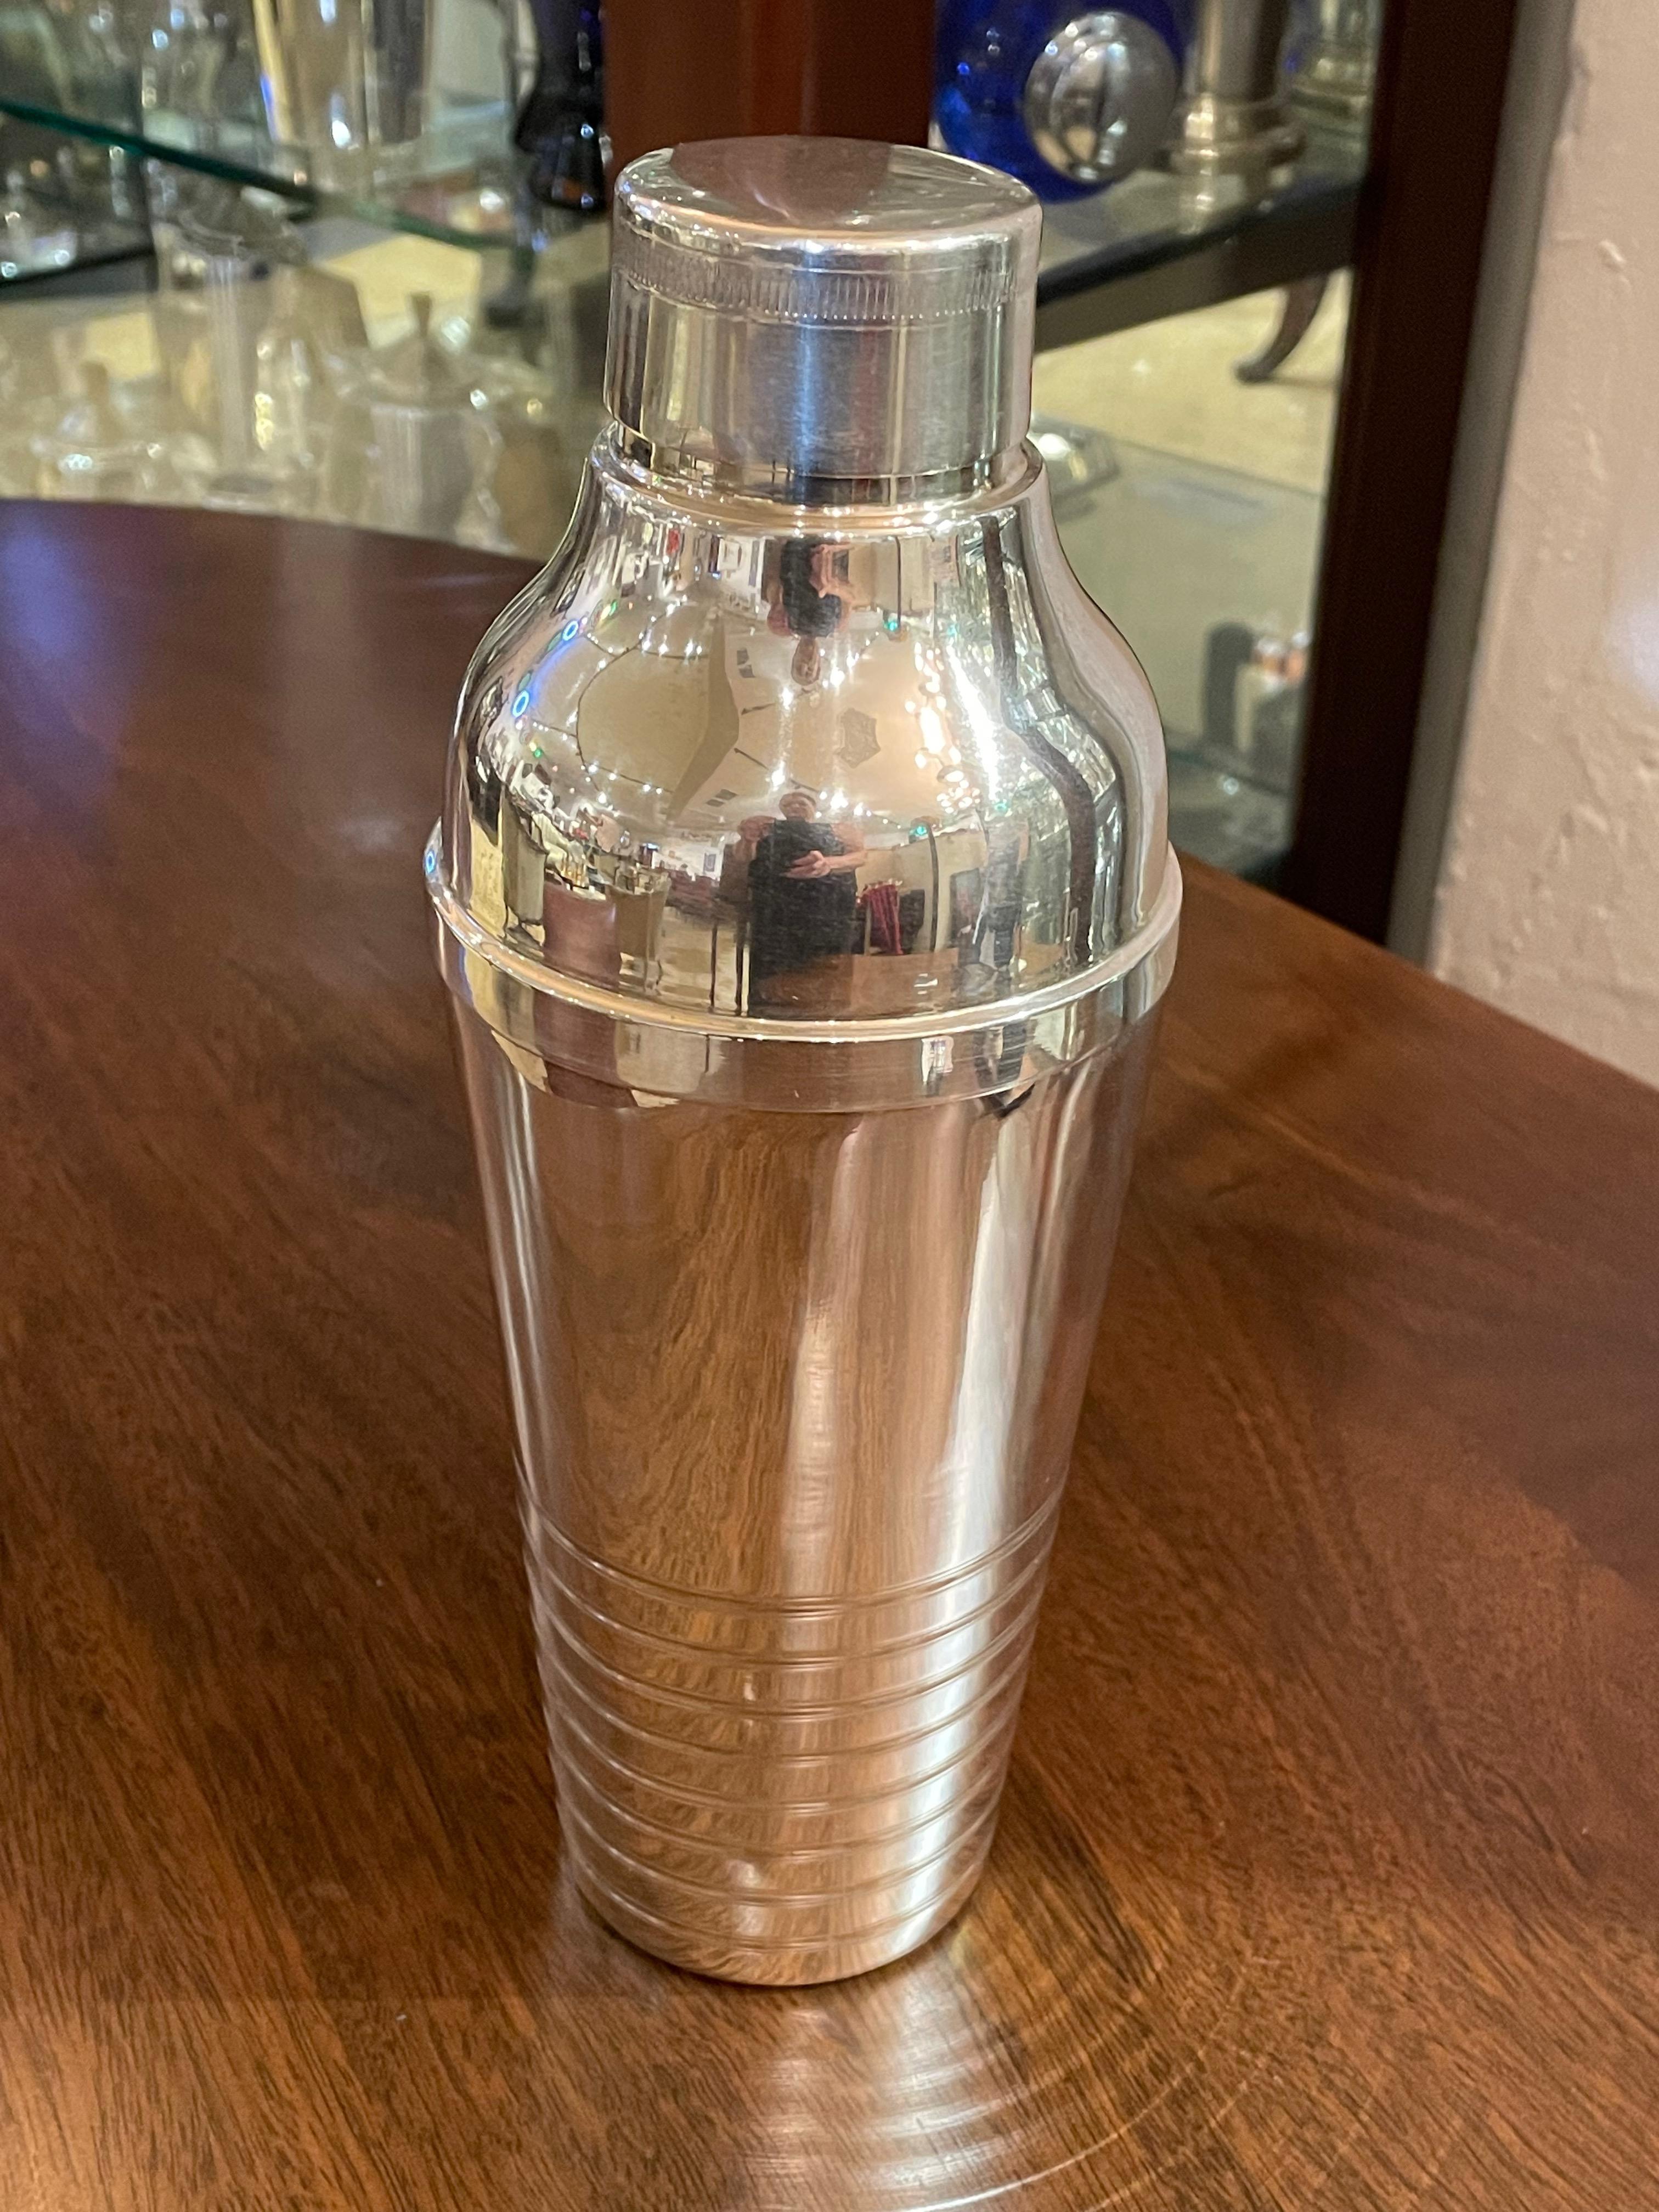 Streamlined and classic French cocktail shaker that is silver plated and in perfect “gift-giving” condition with an interior as pristine as the outside design. This sleek shaker features the “speed line” detailing around the base- which also makes